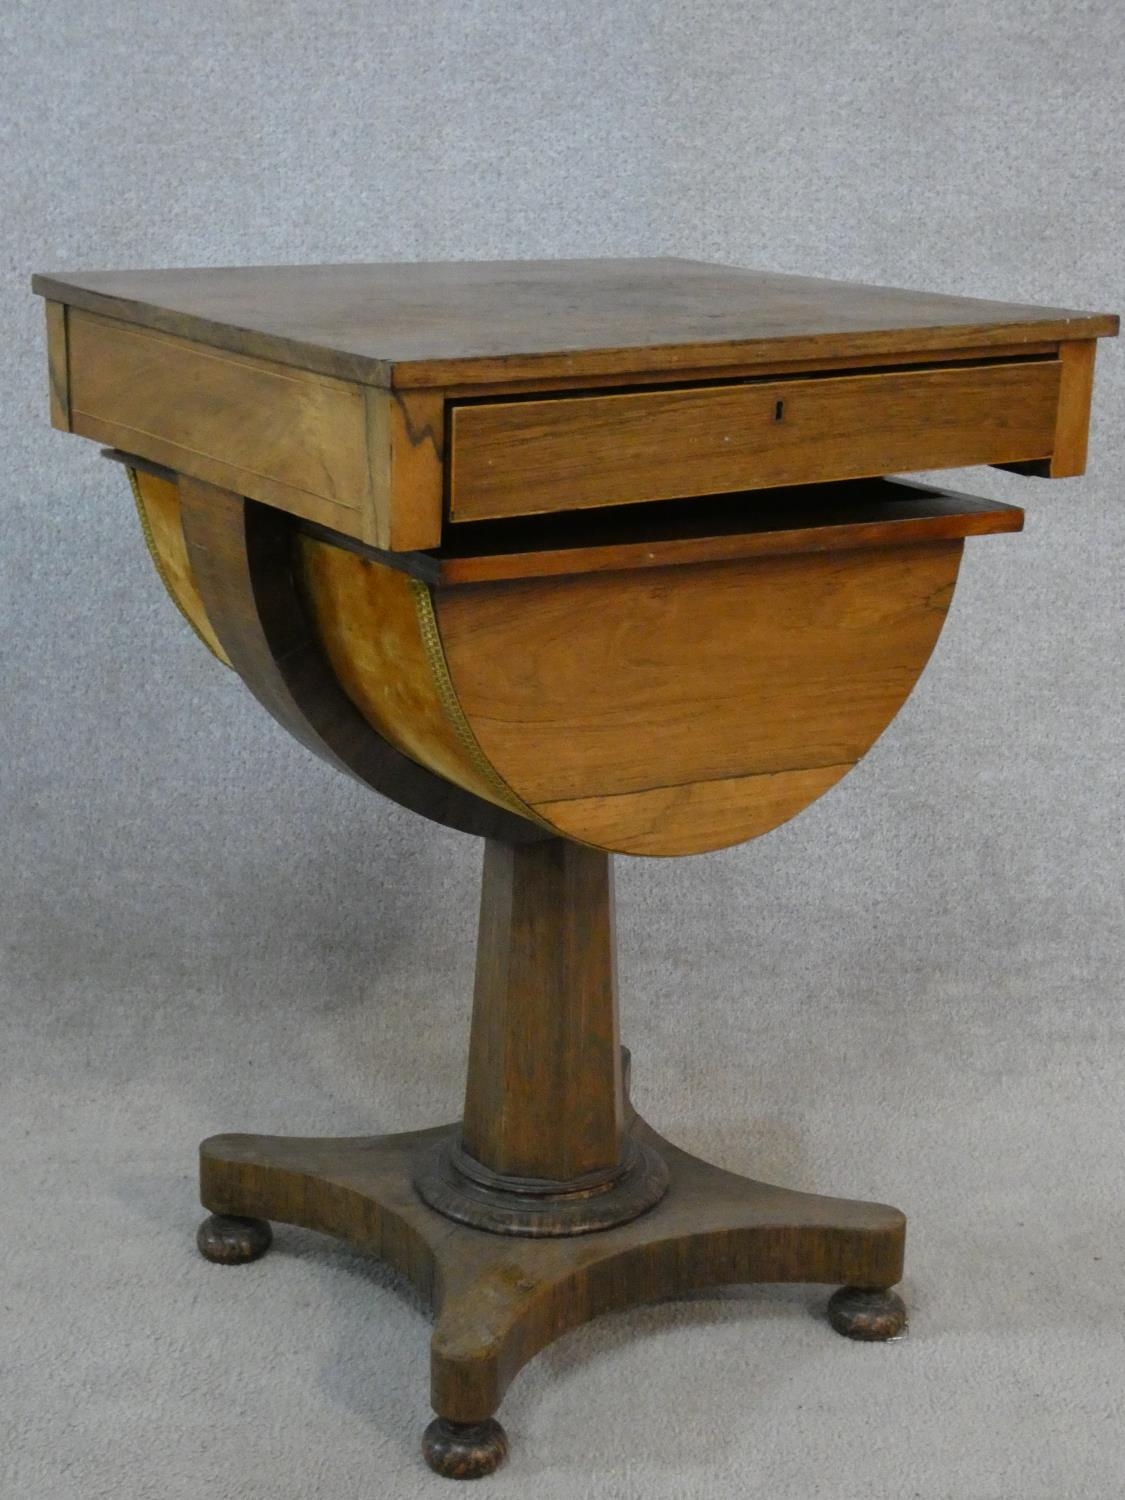 A mid 19th century rosewood sewing table with slide out baize lined work surface and basket - Image 2 of 6